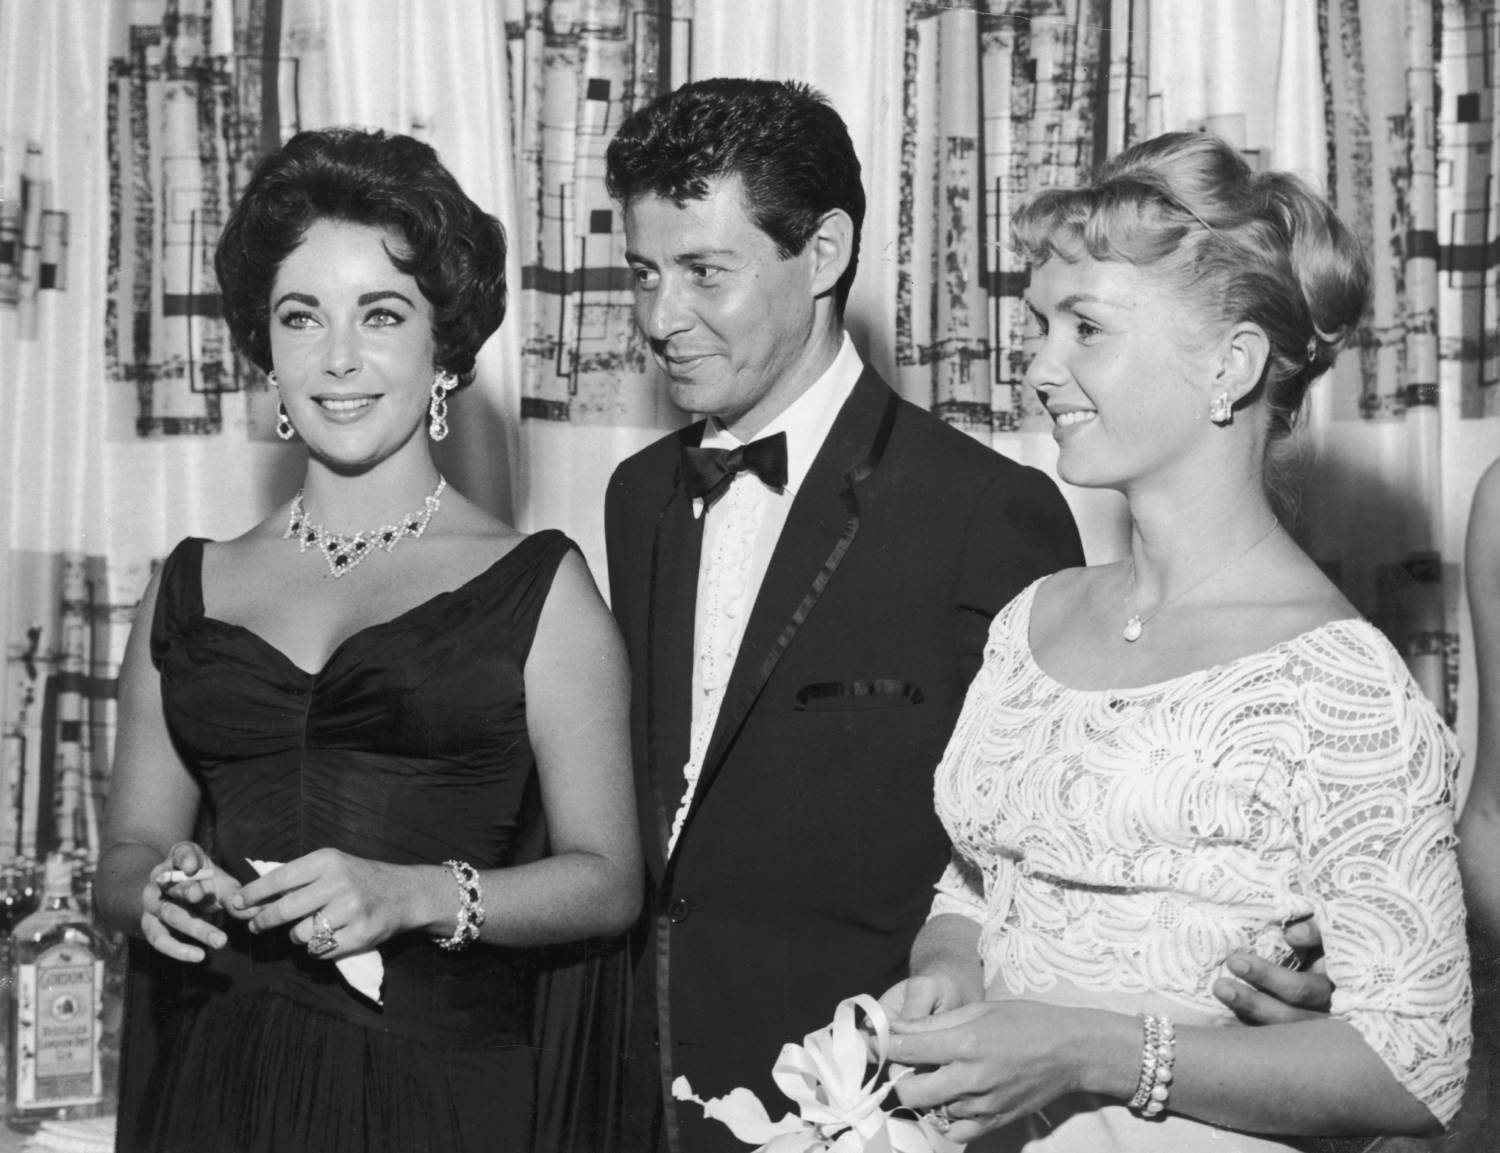 1958: American singer Eddie Fisher, wearing a tuxedo, stands with arm around his wife, American actor Debbie Reynolds (R) and smiles while looking at British-born actor Elizabeth Taylor, smoking a cigarette, Las Vegas, Nevada. The next year Fisher left Reynolds and married Taylor